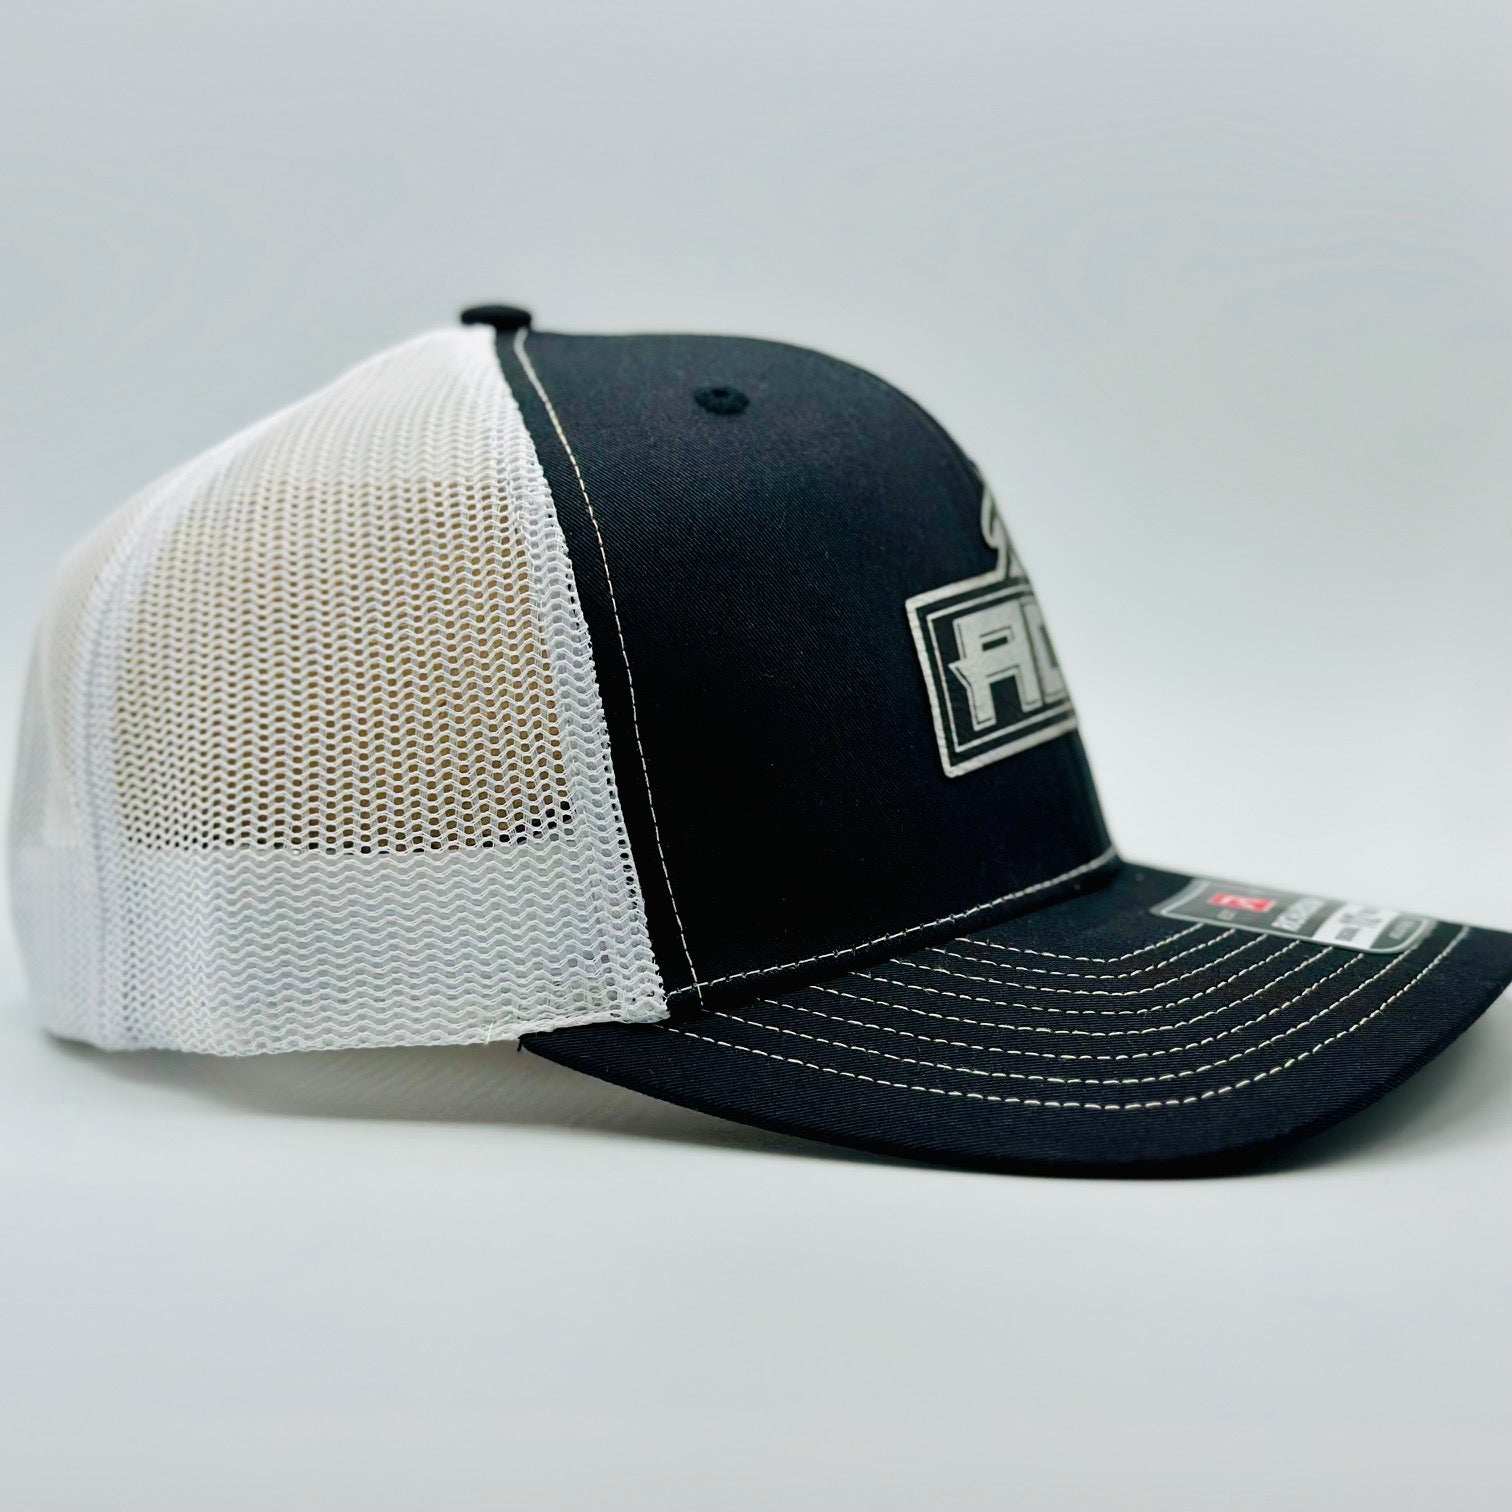 Black/White Hat With Sliver Patch